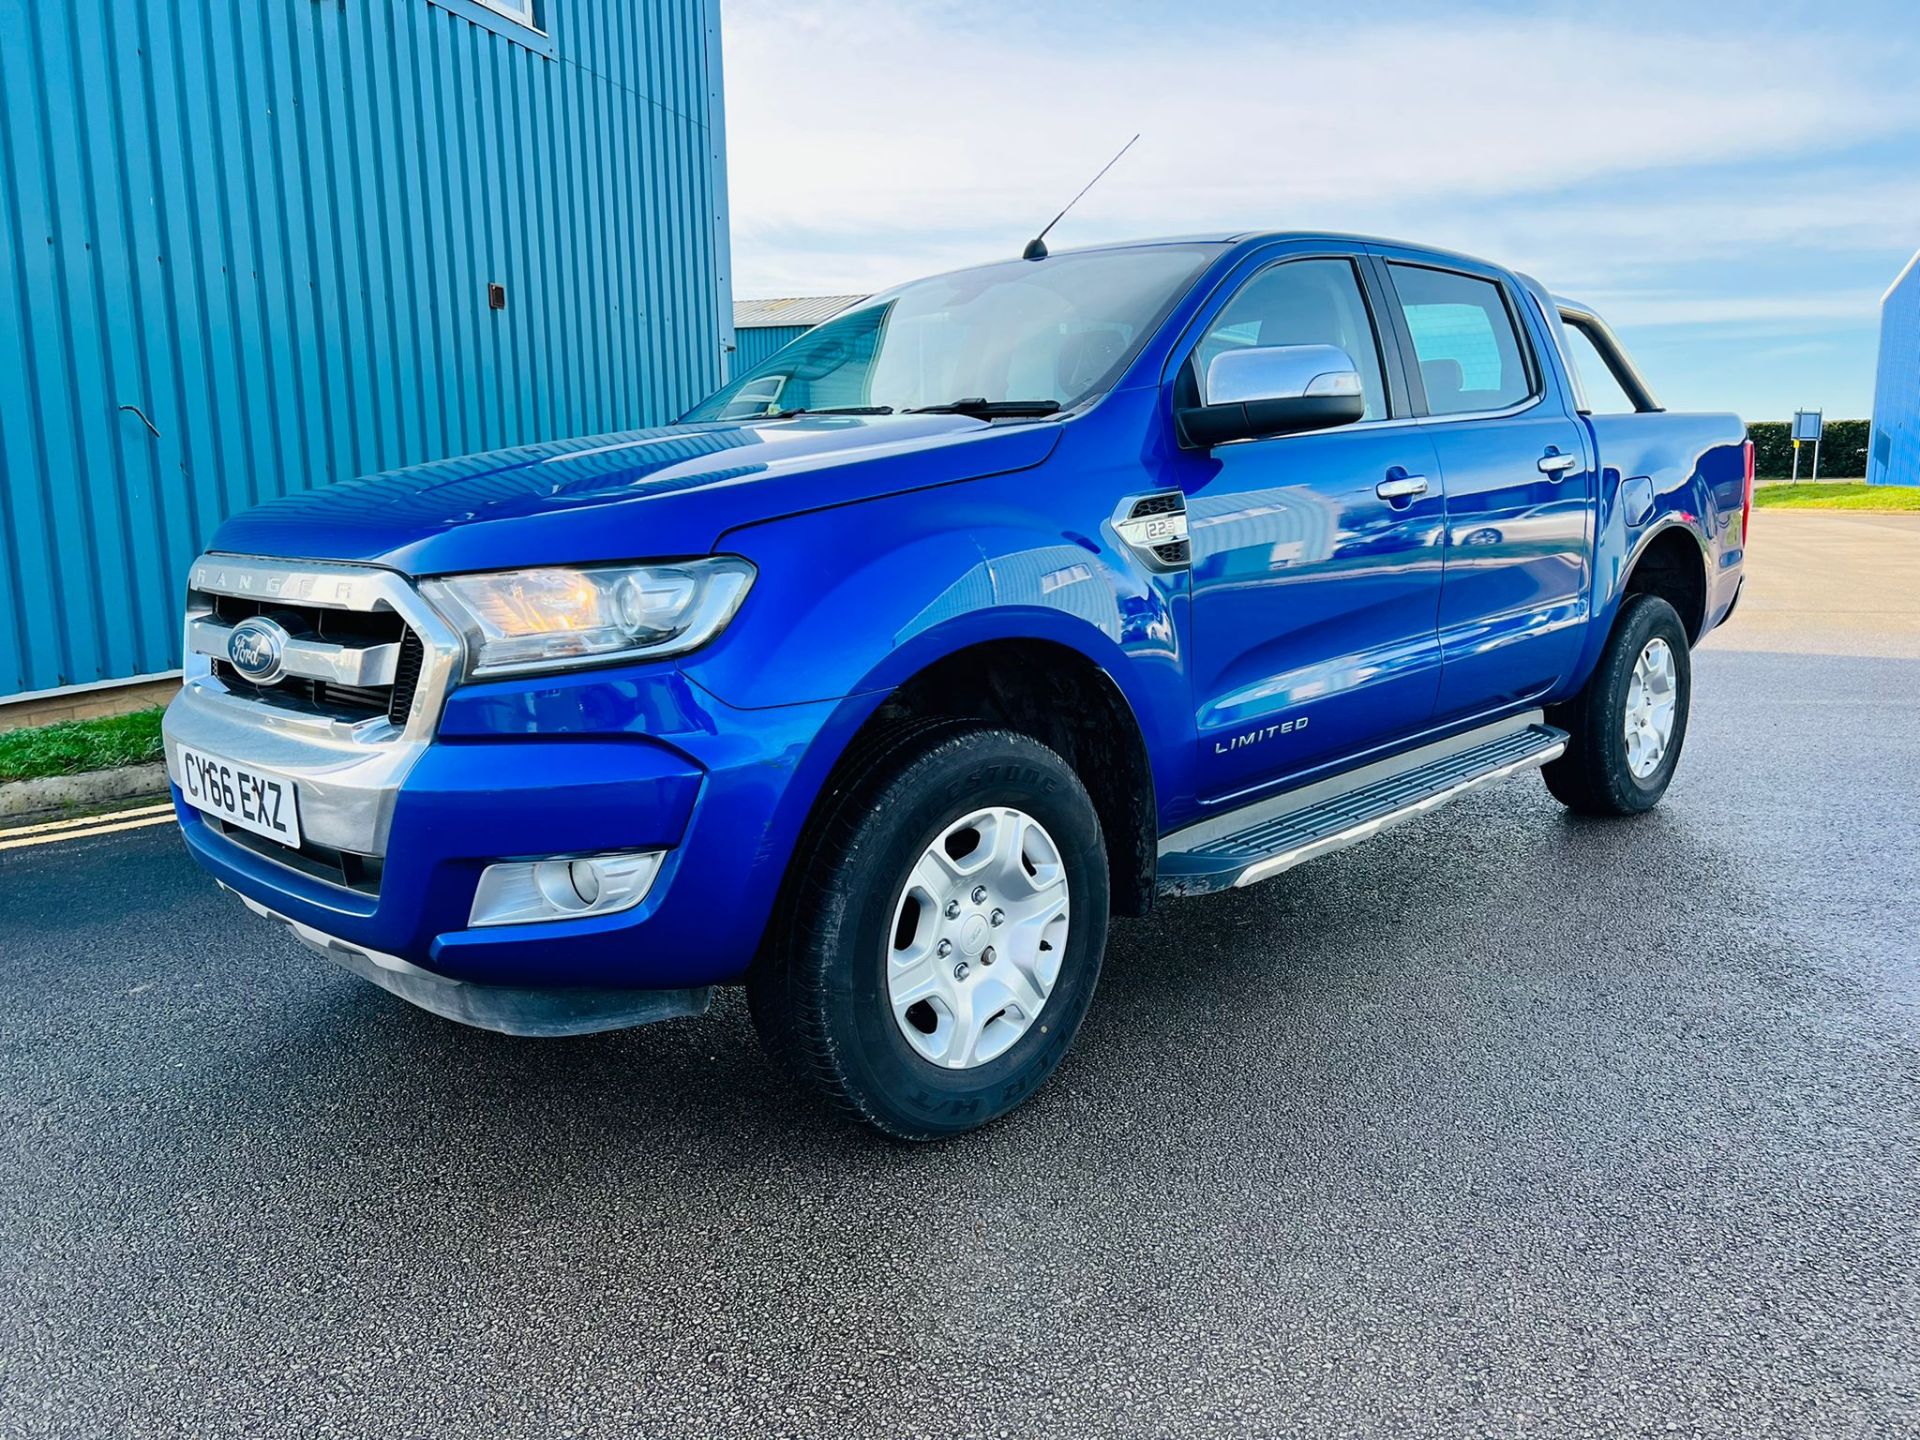 Ford Ranger 2.2 TDCI Limited 4x4 Double Cab - 2017 Model - Euro 6 - ULEZ Compliant - Air con -